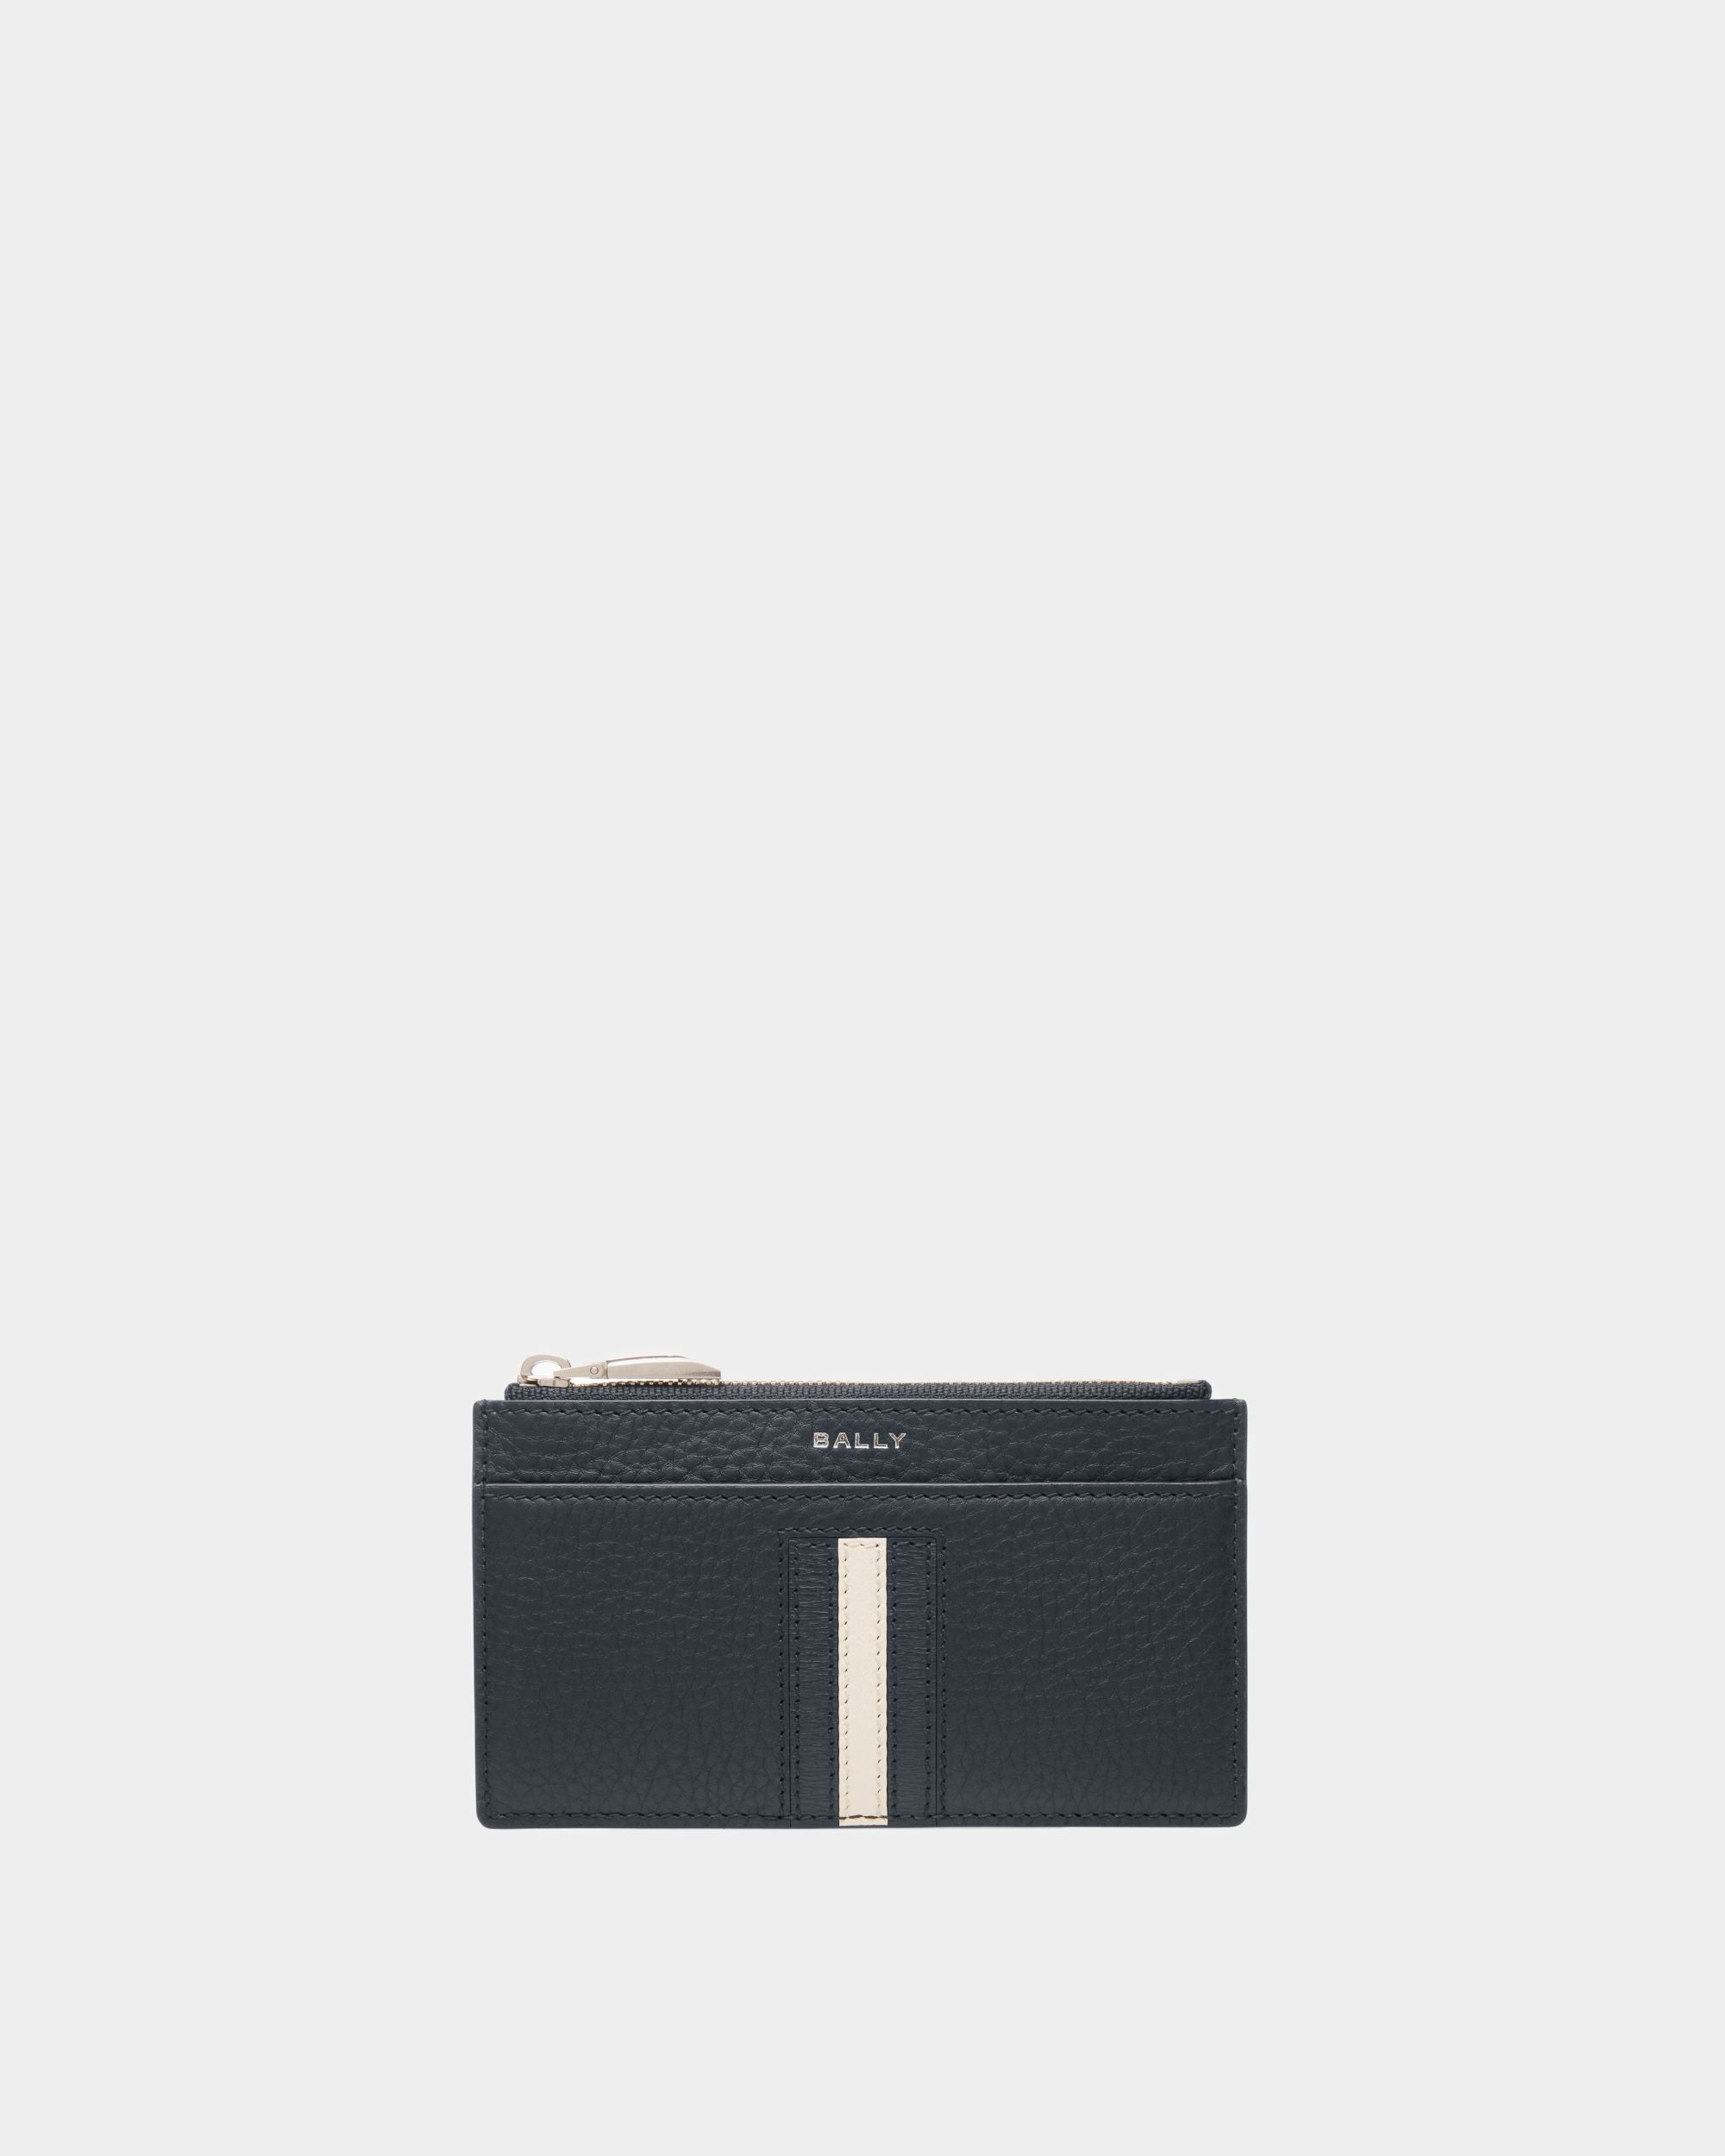 Men's Ribbon Business Card Holder In Midnight Leather | Bally | Still Life Front